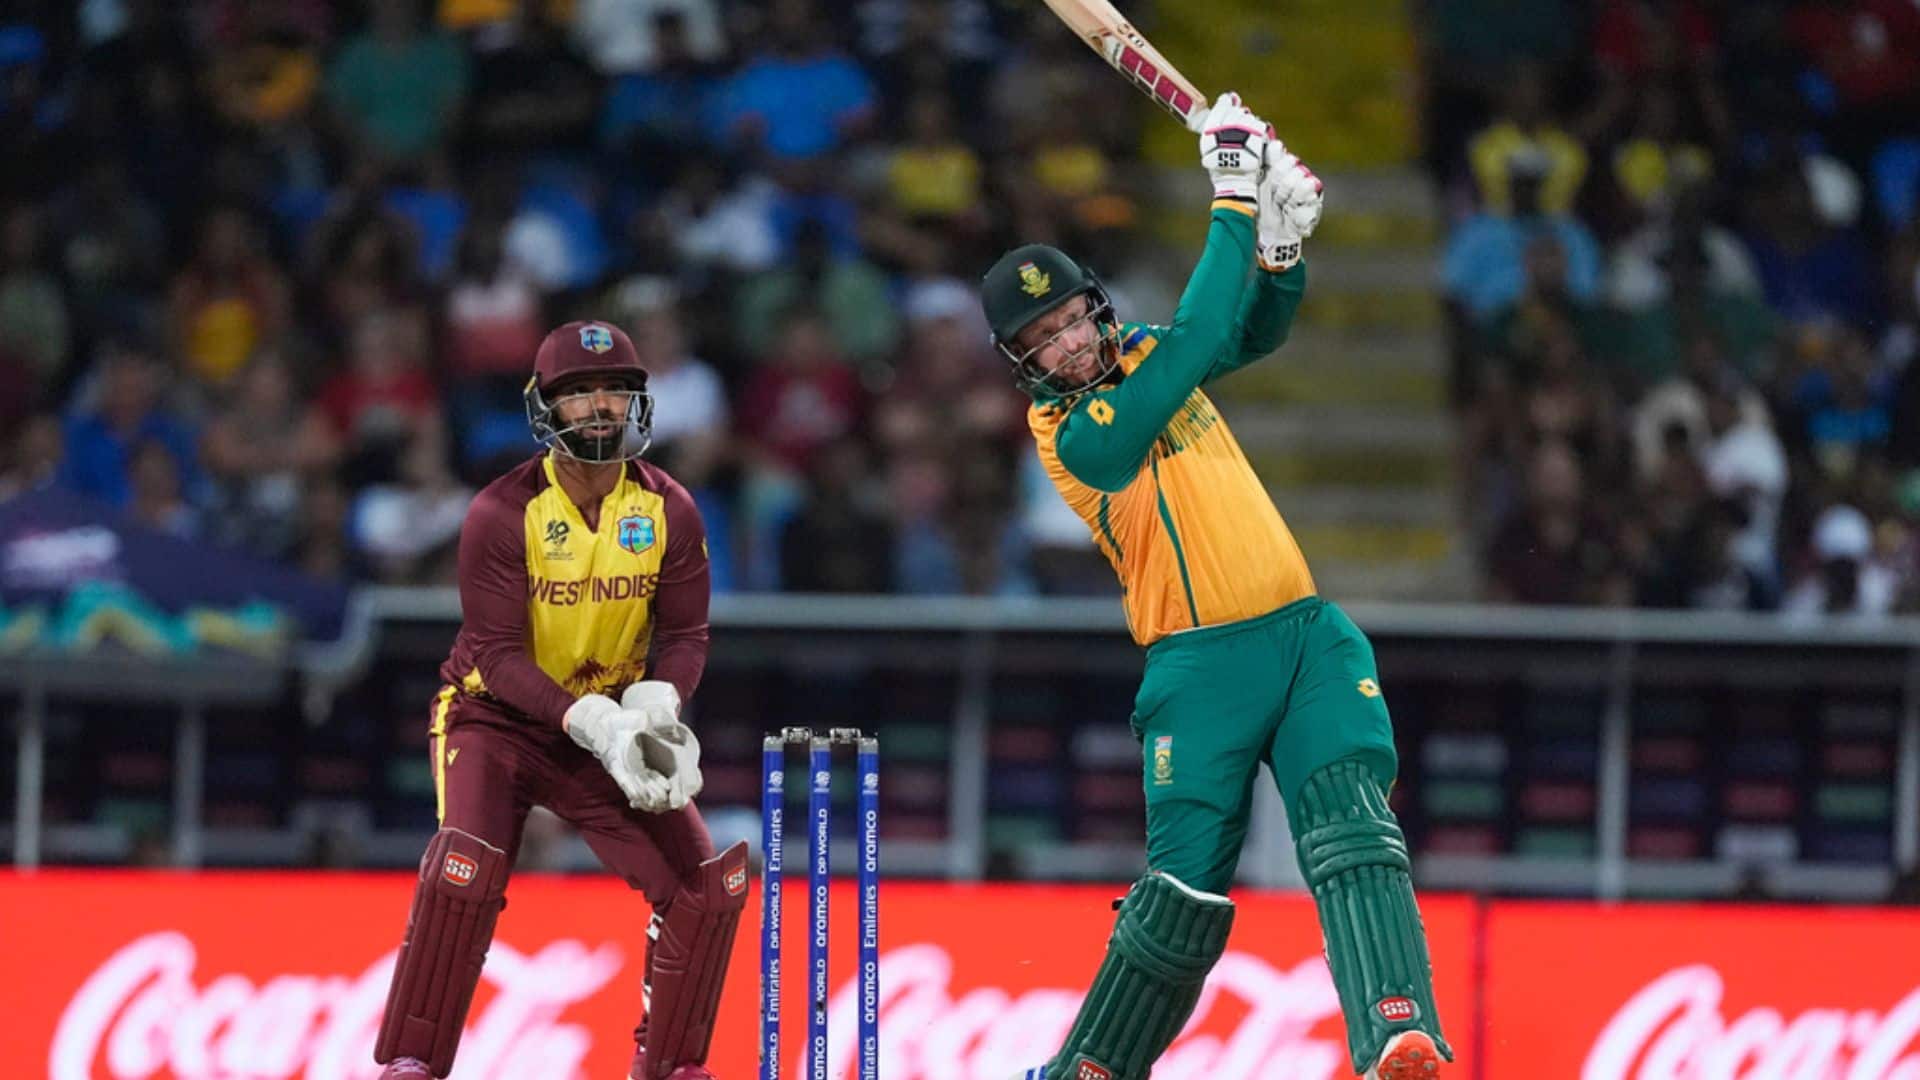 SA defeated WI to enter the semifinal [AP]